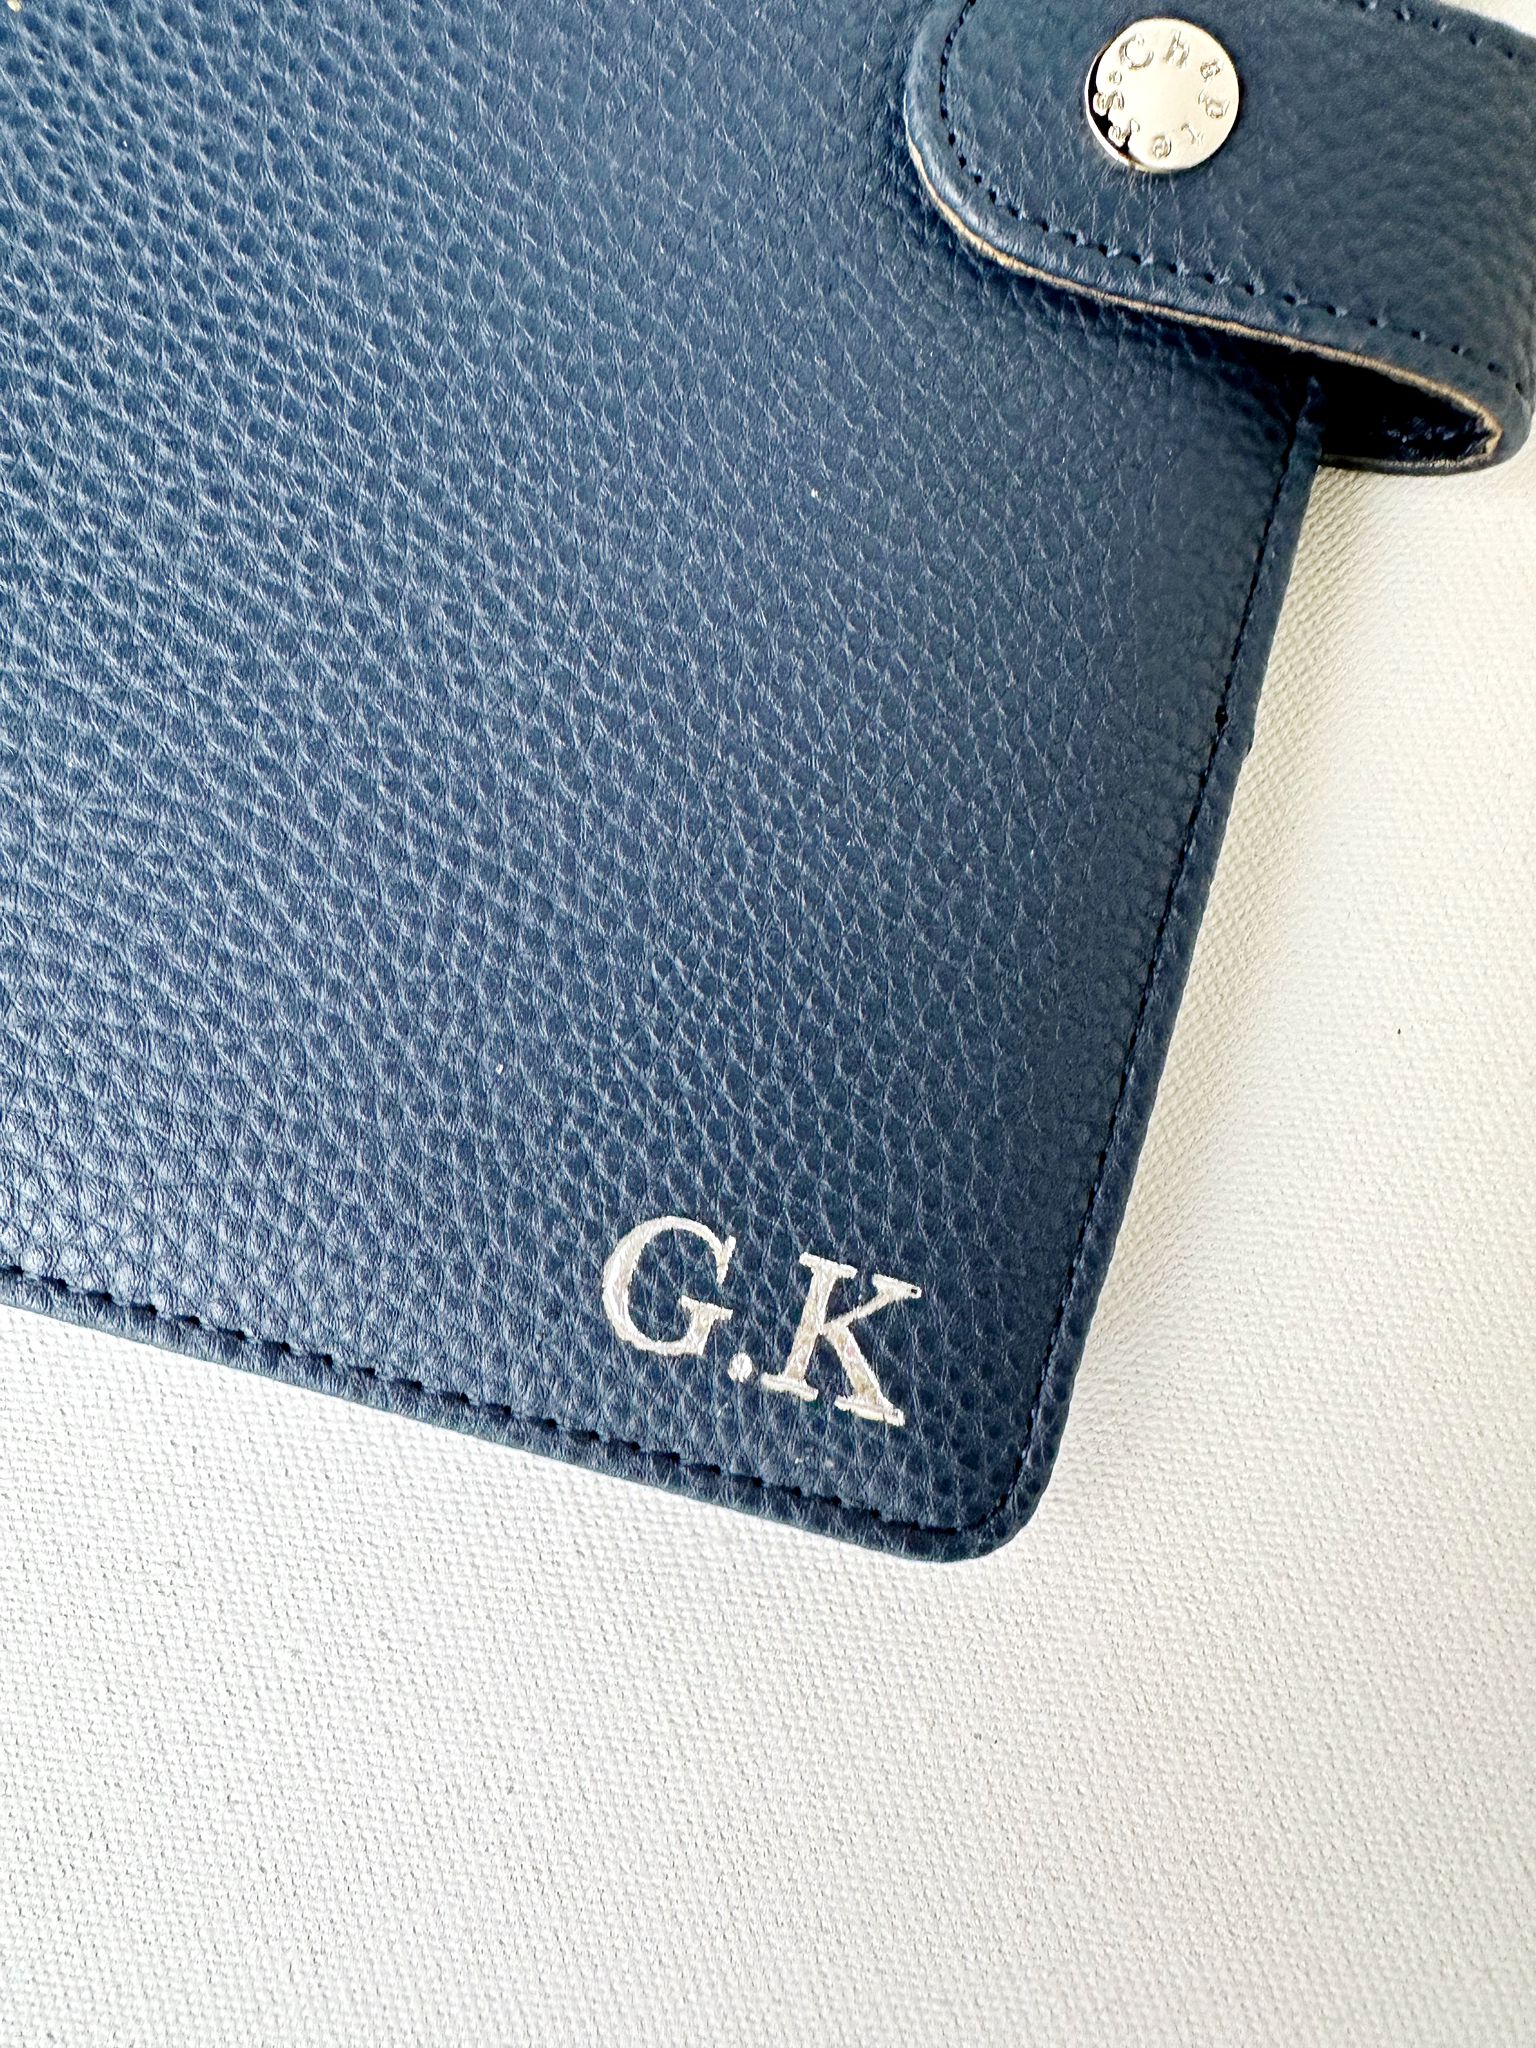 B6 Defter, Navy - G.K - Chapters